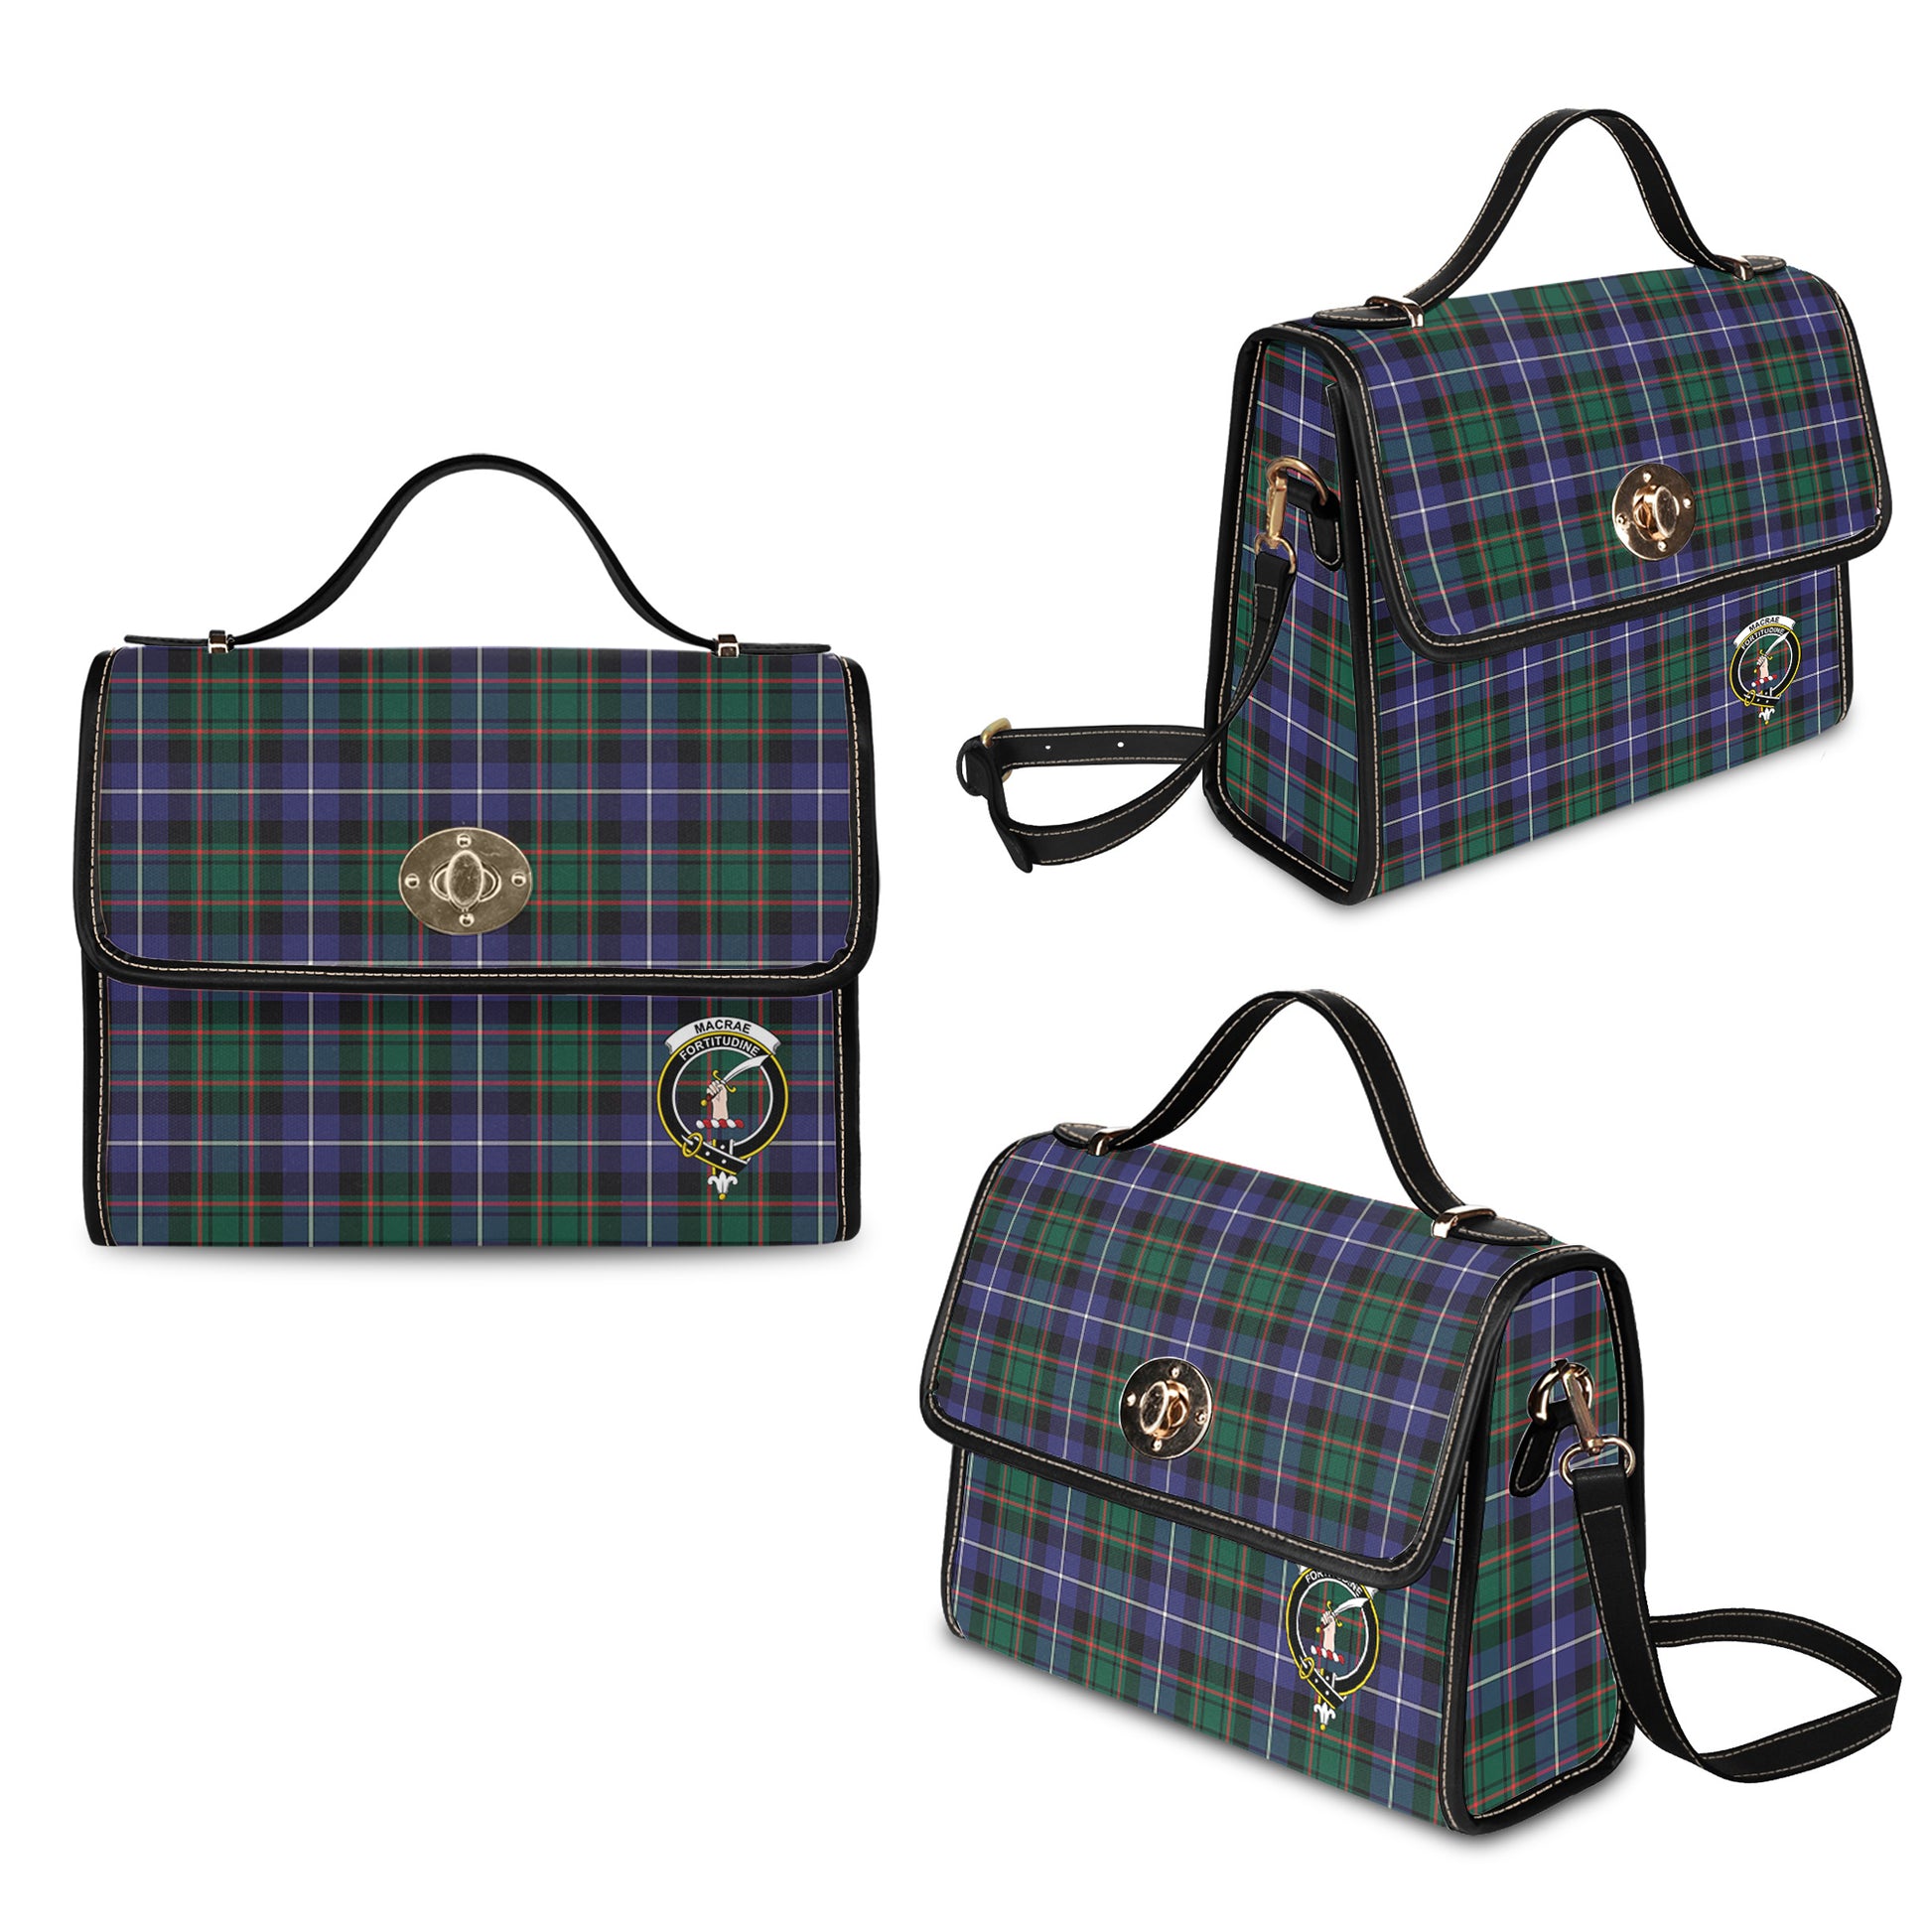 macrae-hunting-modern-tartan-leather-strap-waterproof-canvas-bag-with-family-crest